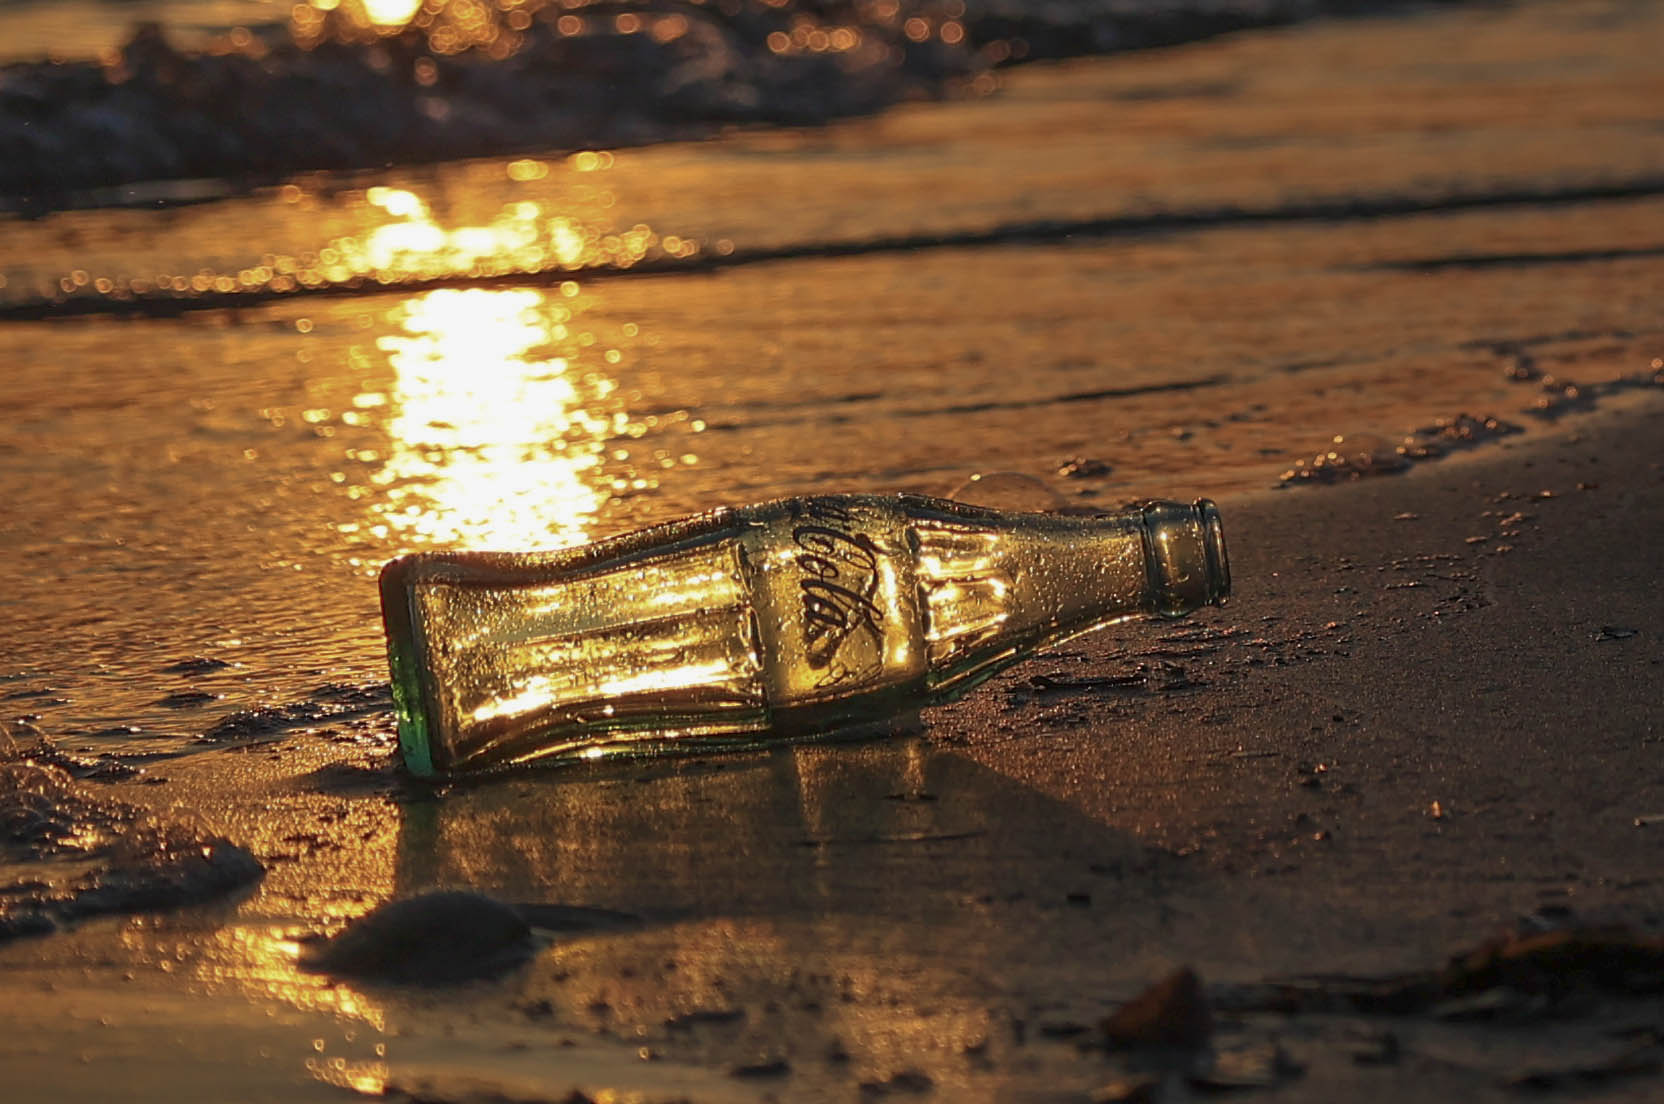 A Coca-Cola empty bottle washed up on the beach